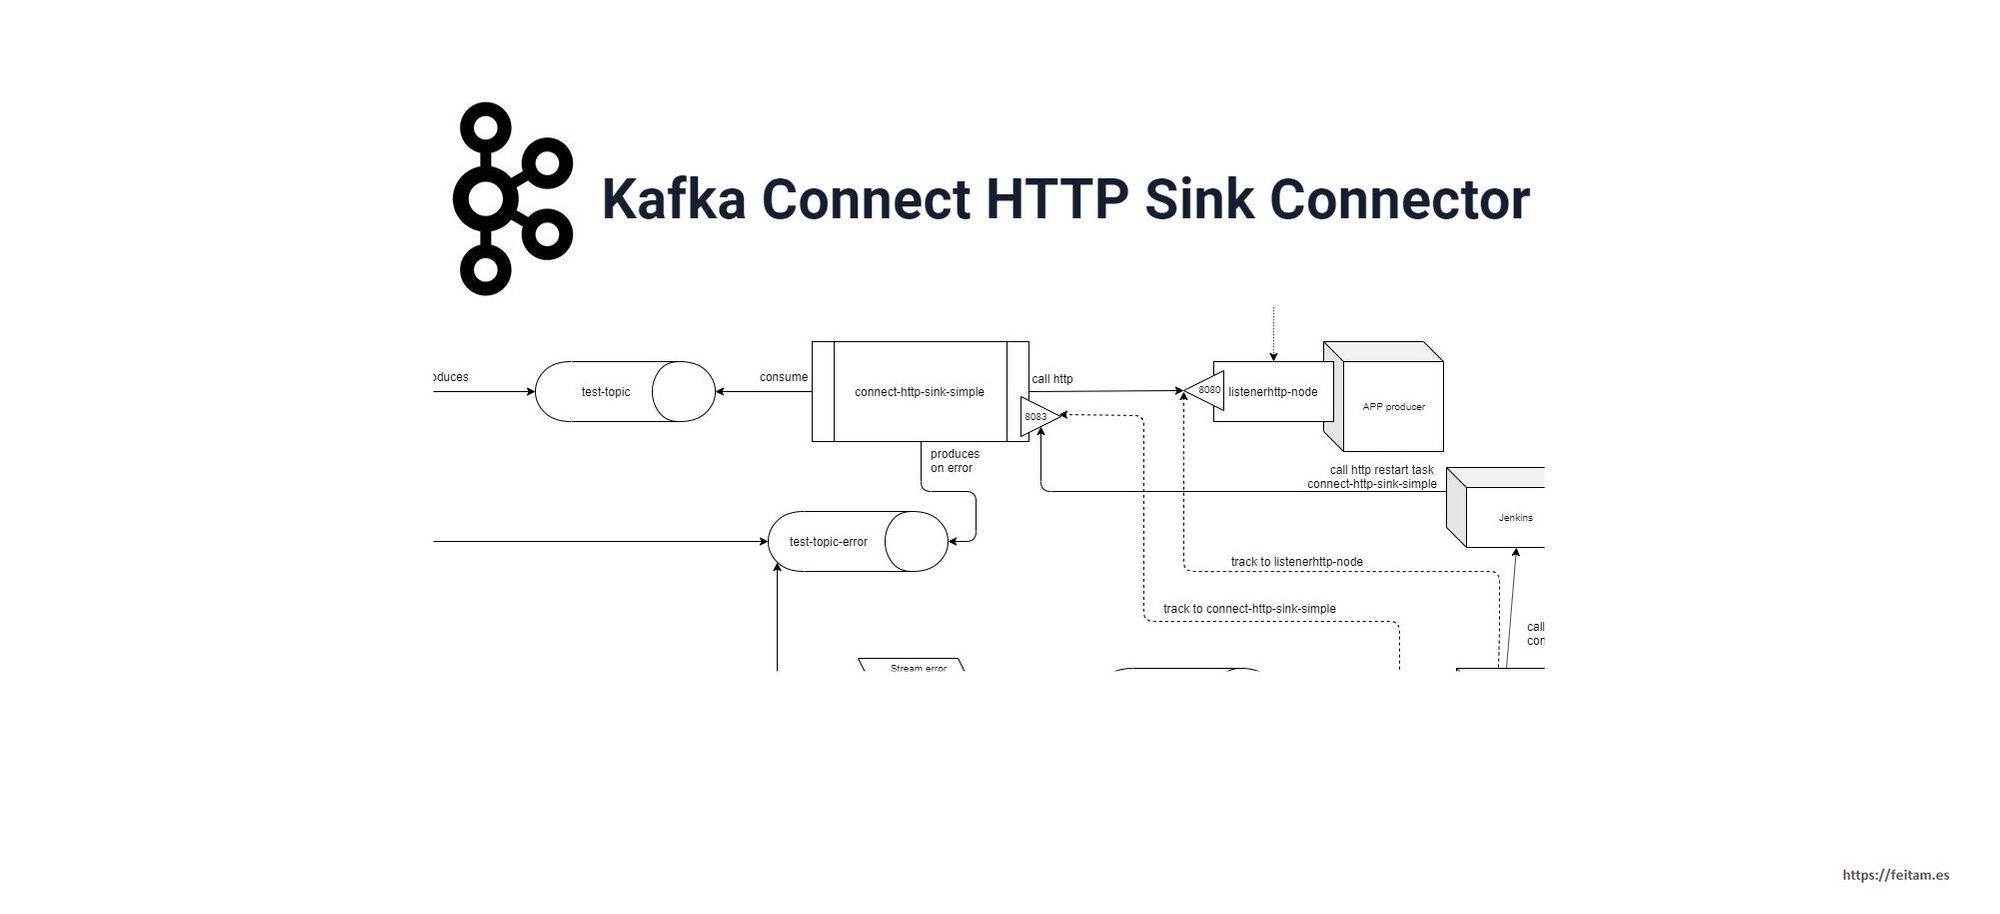 First steps with Kafka Connect HTTP Sink: installation, configuration, errors manager and monitoring